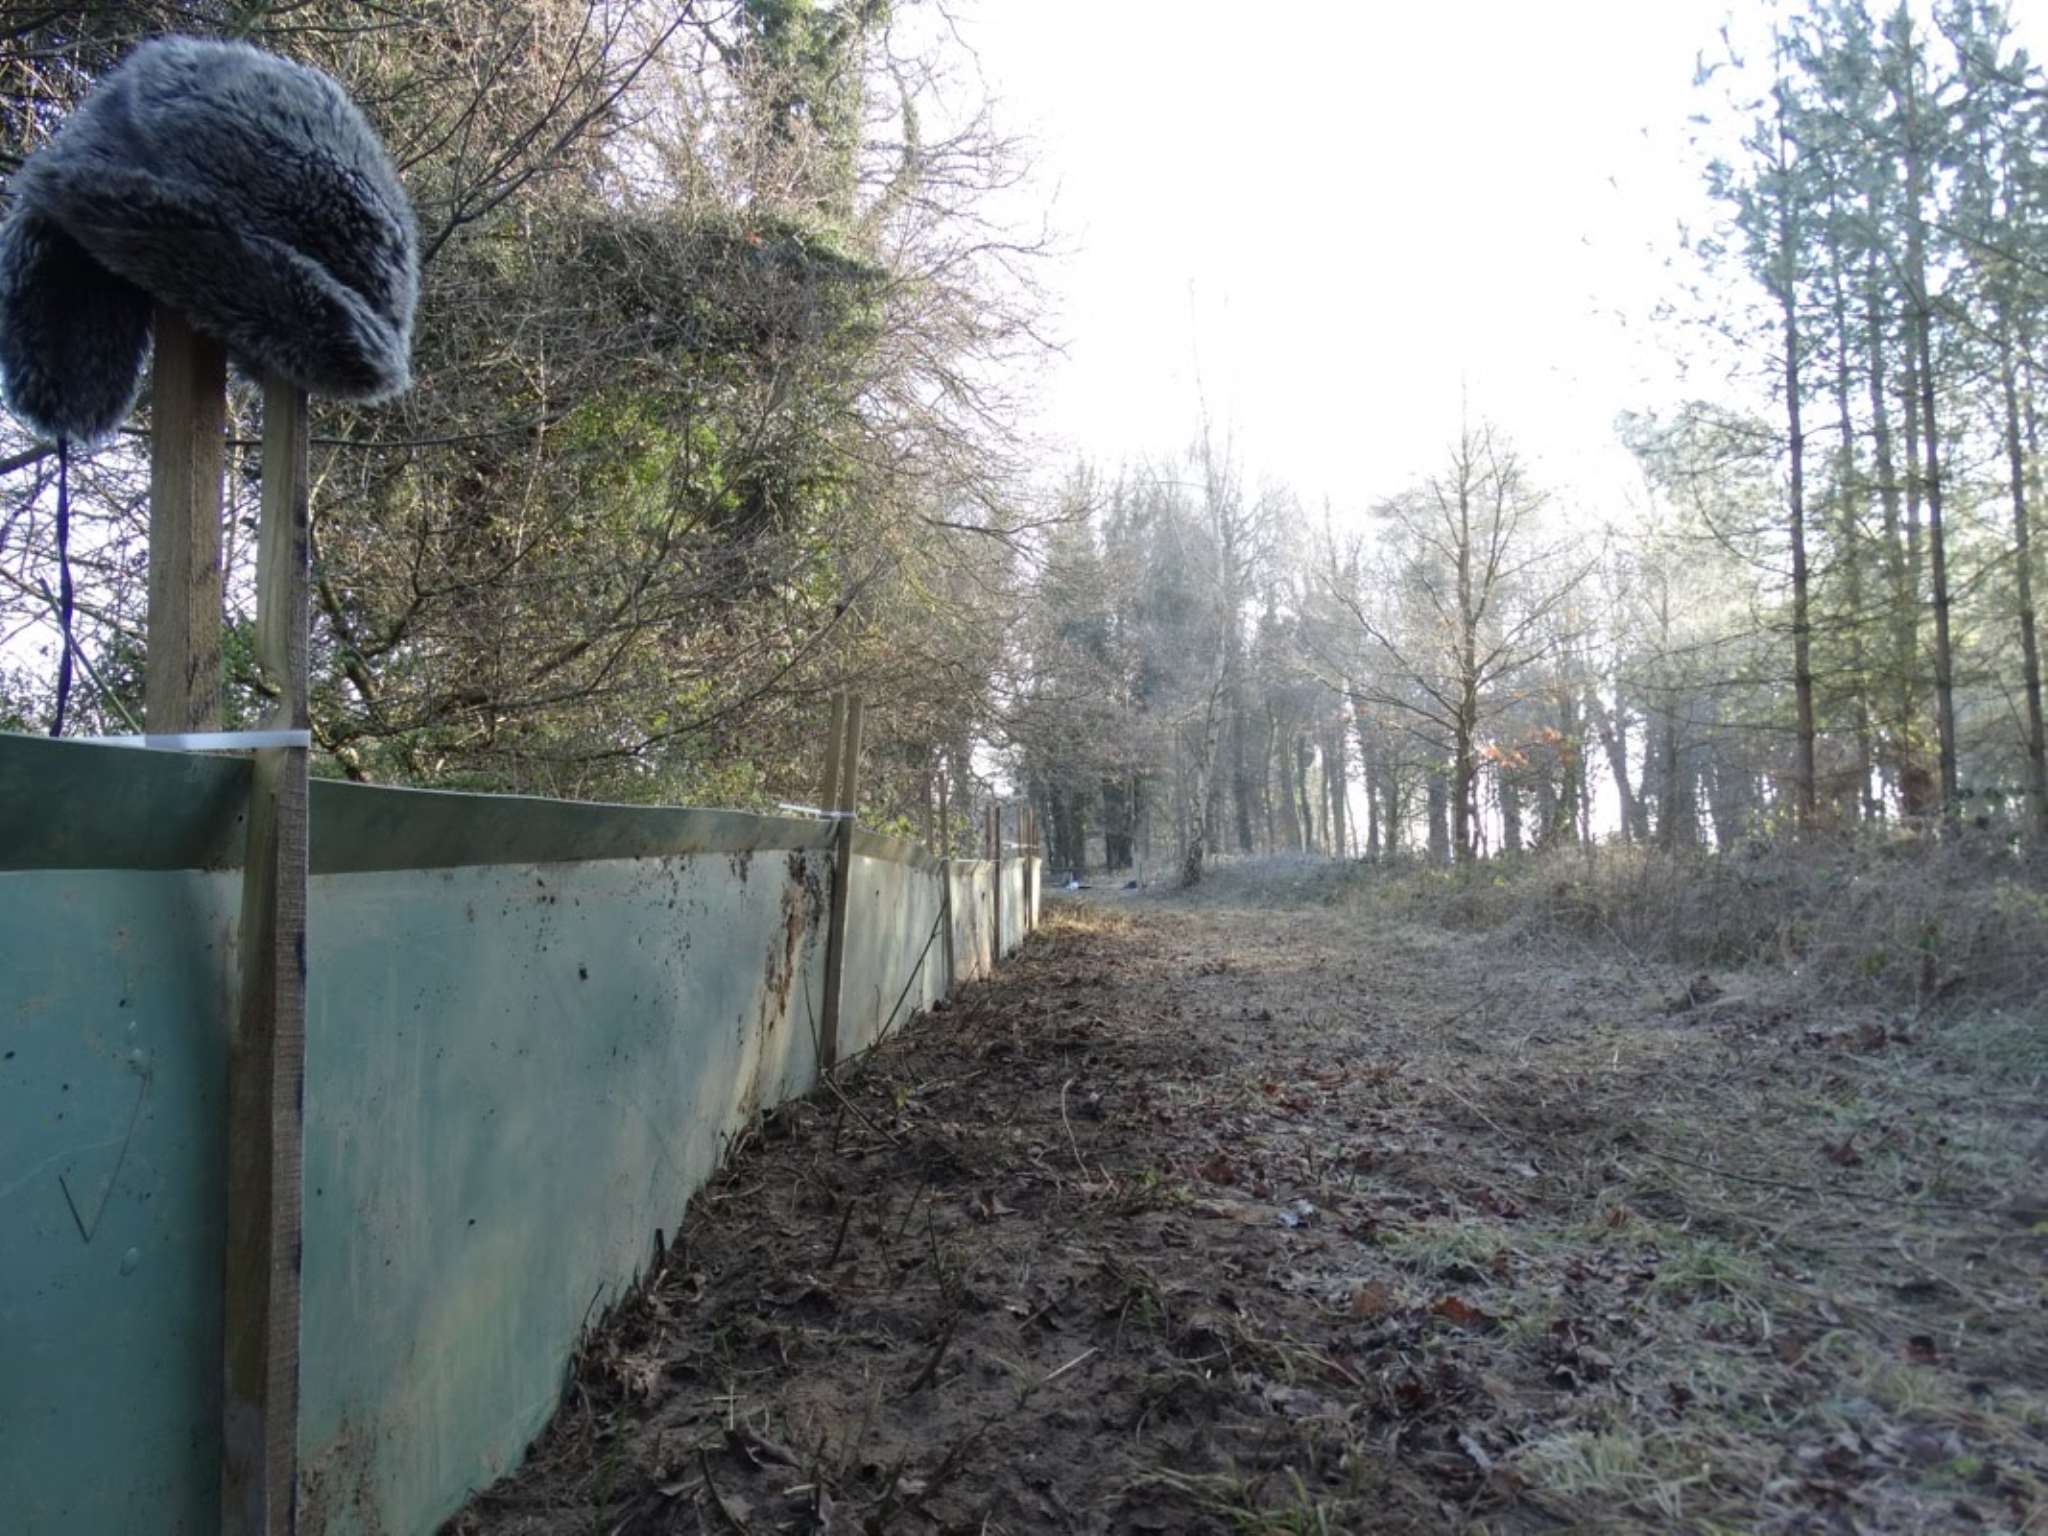 A photo from the FoTF Conservation Event - January 2019 - Erecting the Toad Fence at Cranwich : A section of the erected fence